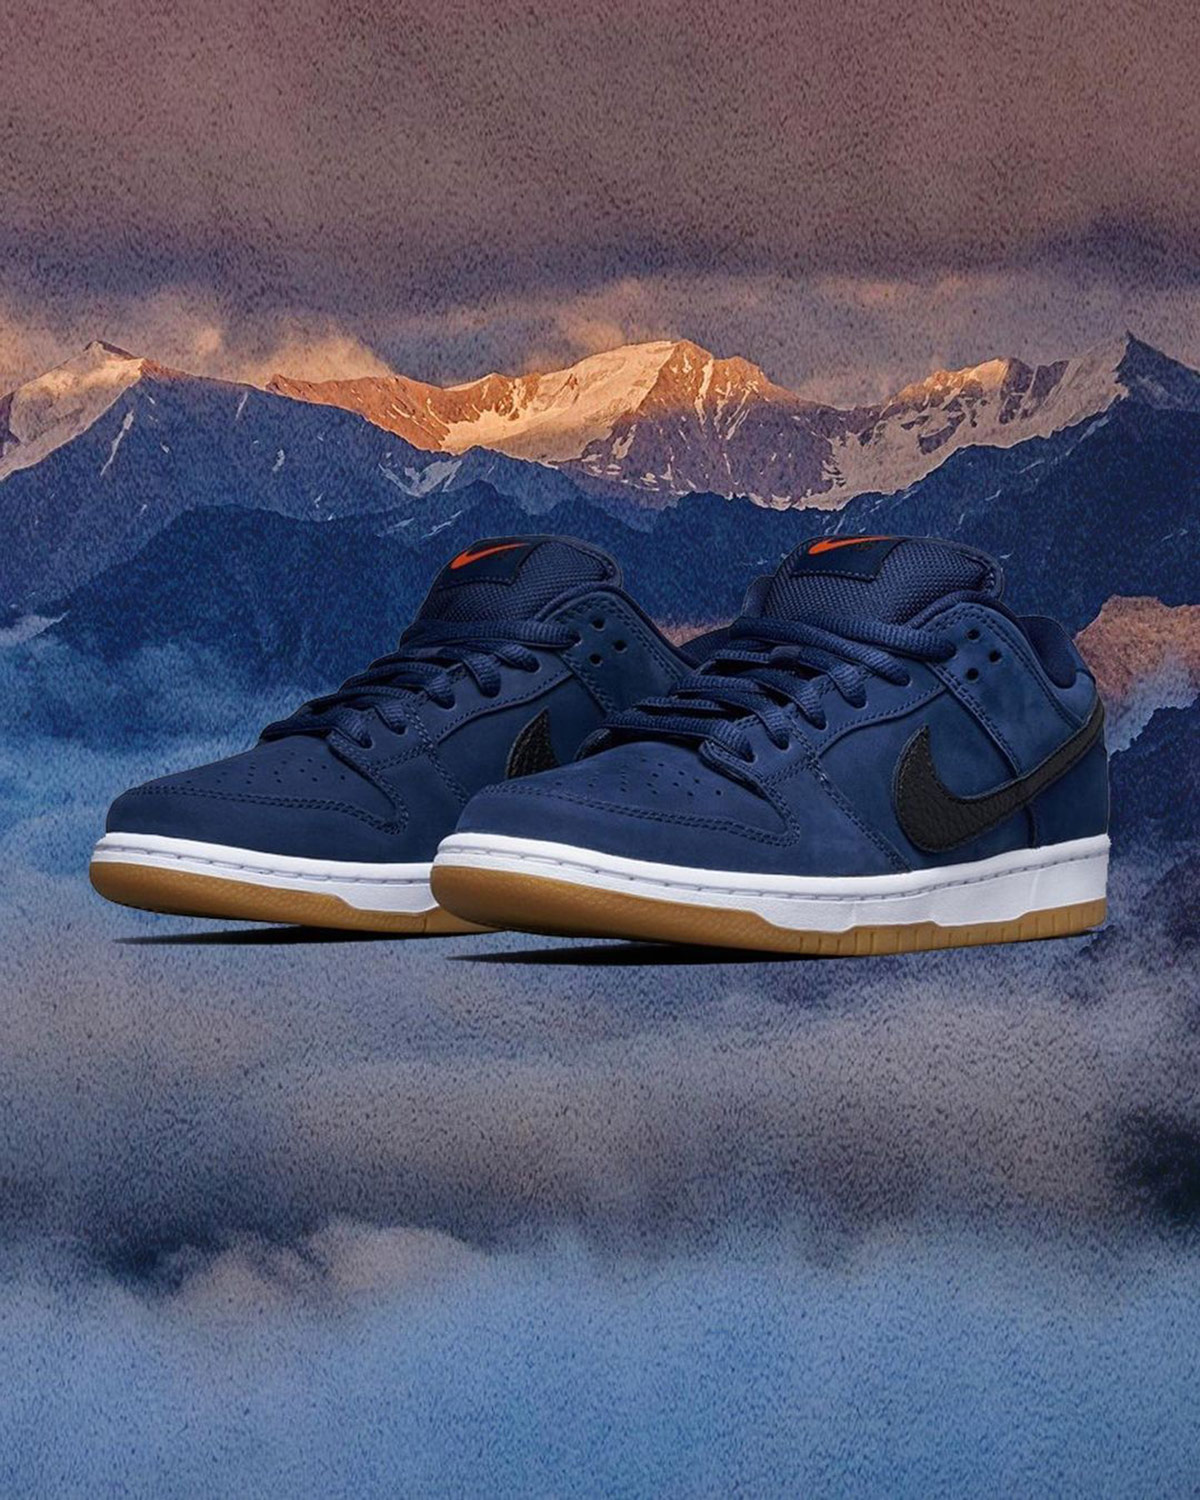 Nike SB nike sb navy blue Dunk Low Pro ISO Navy: Official Release Information